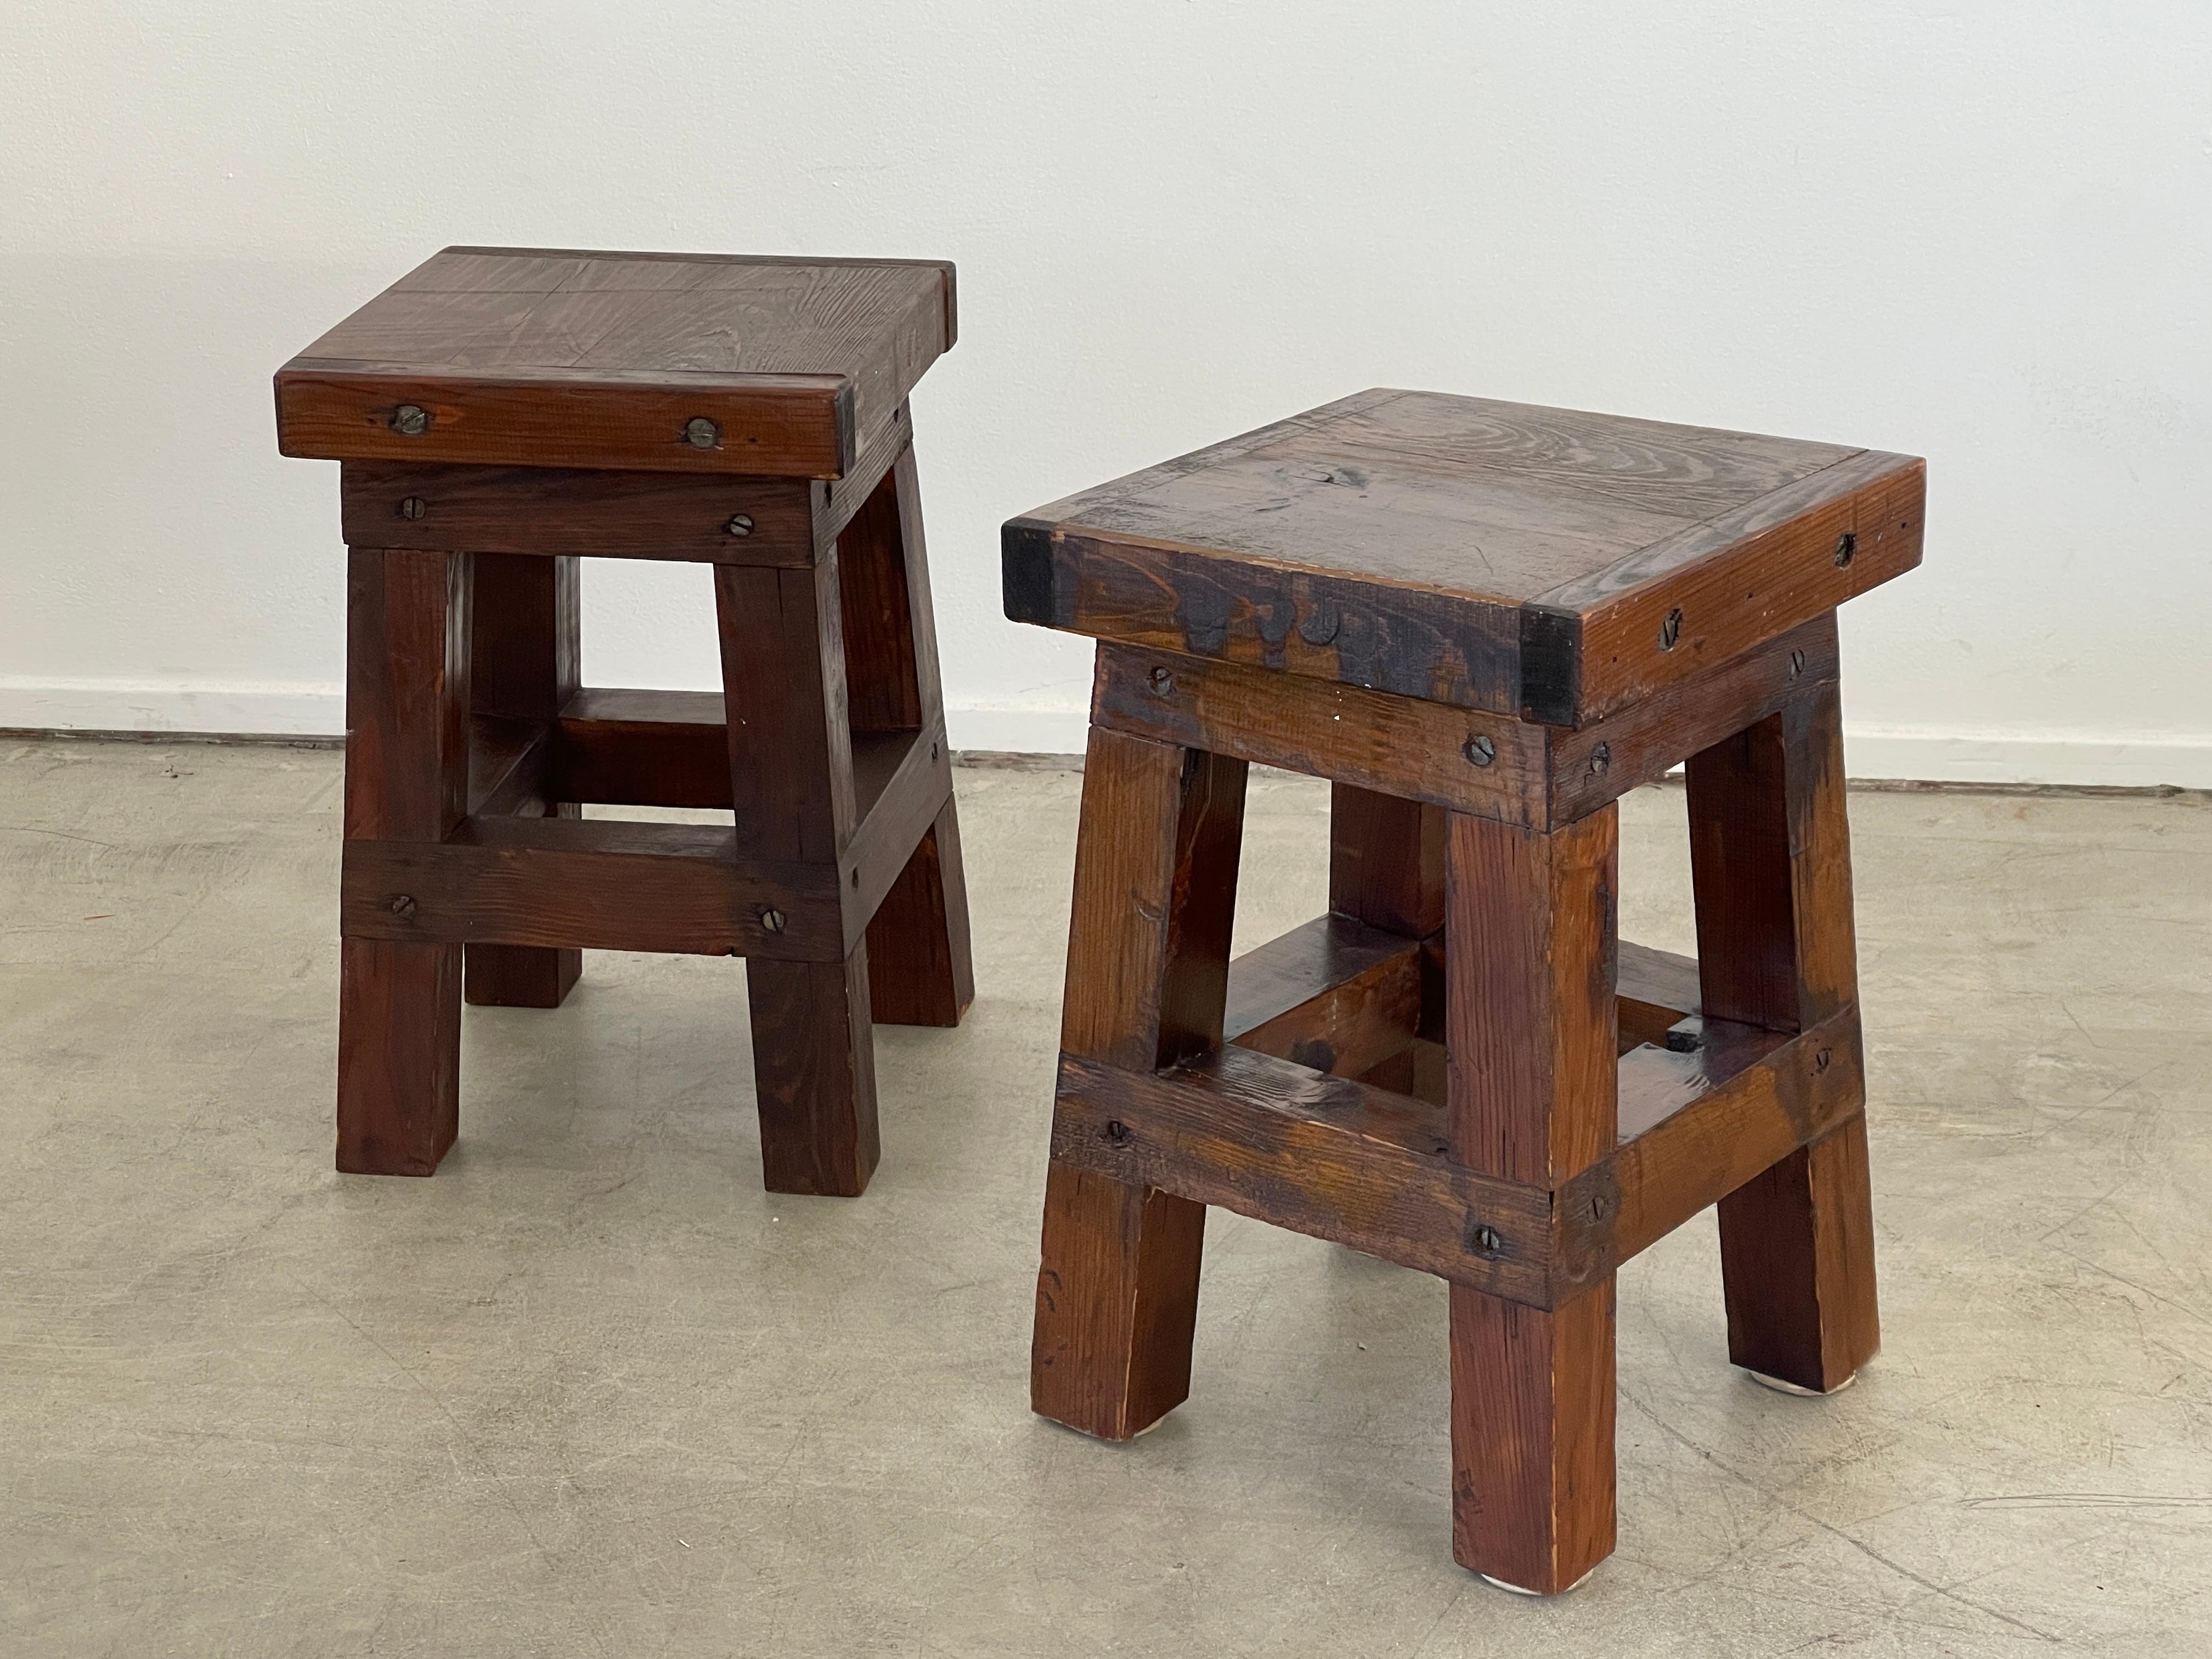 Industrial primitive stools with thick slabs of wood and great patina 
Joints and hardware add to simple design.

Great as nightstands or end tables 